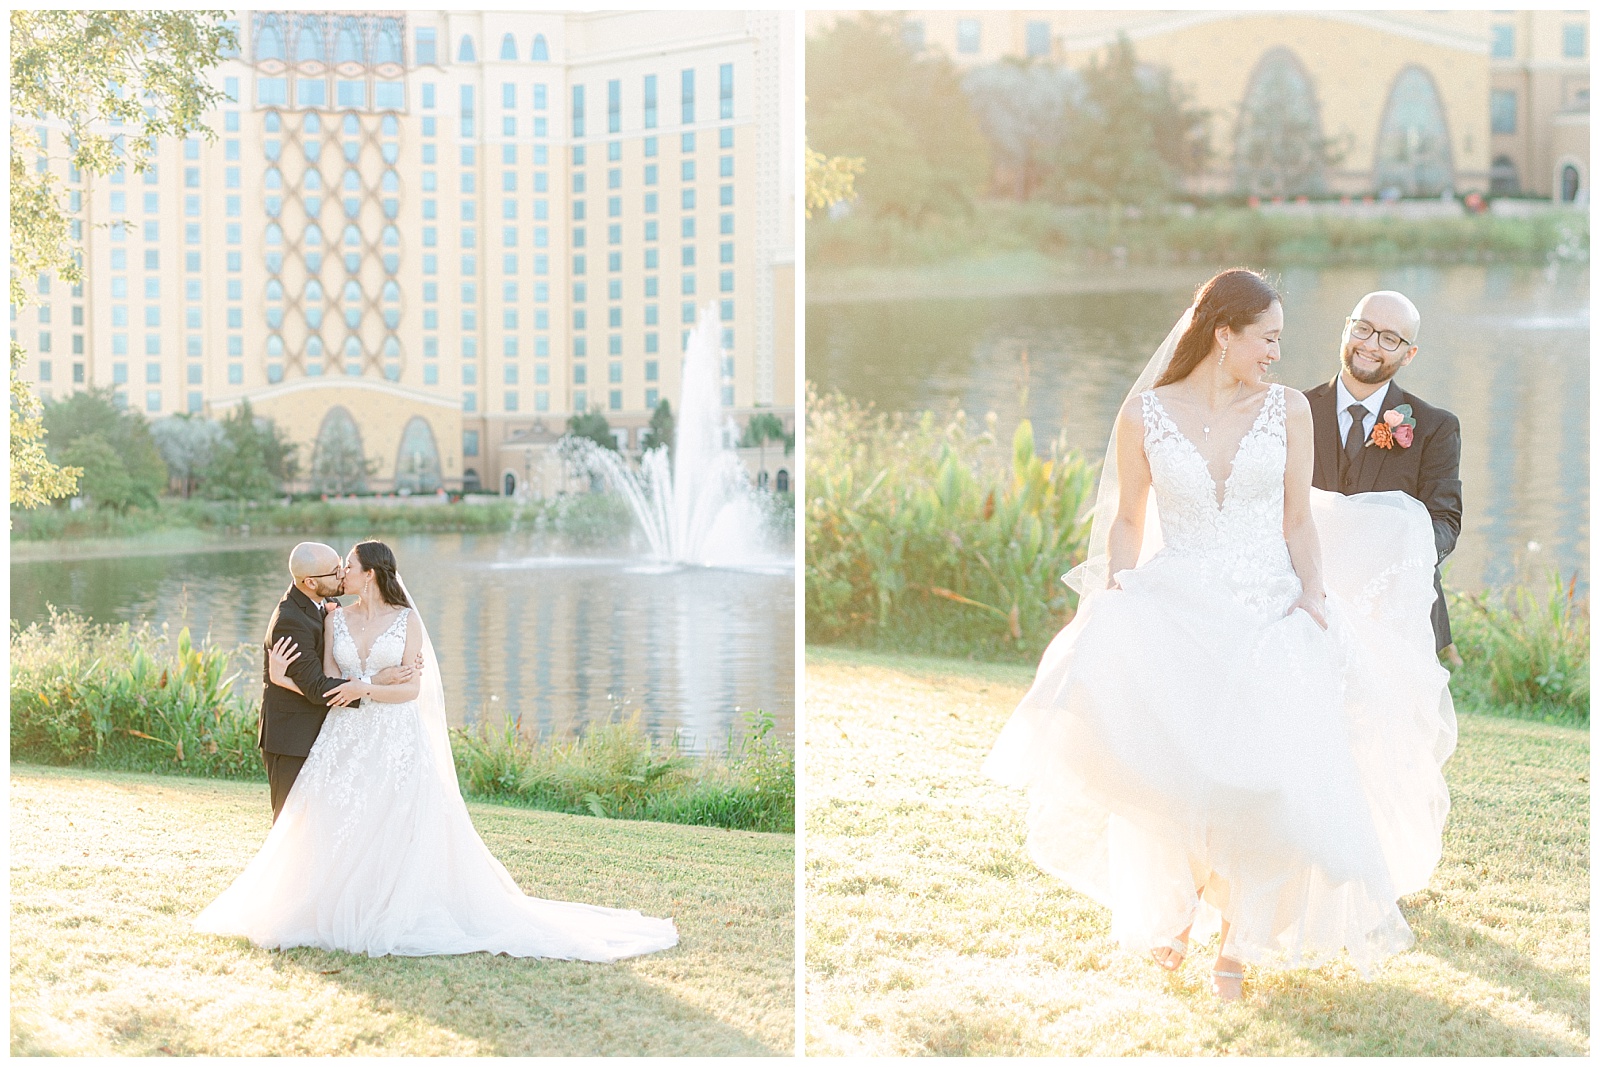 End of morning couples portraits on wedding day at Disney's Riviera Resort by Elizabeth Kane Photography in Orlando Florida